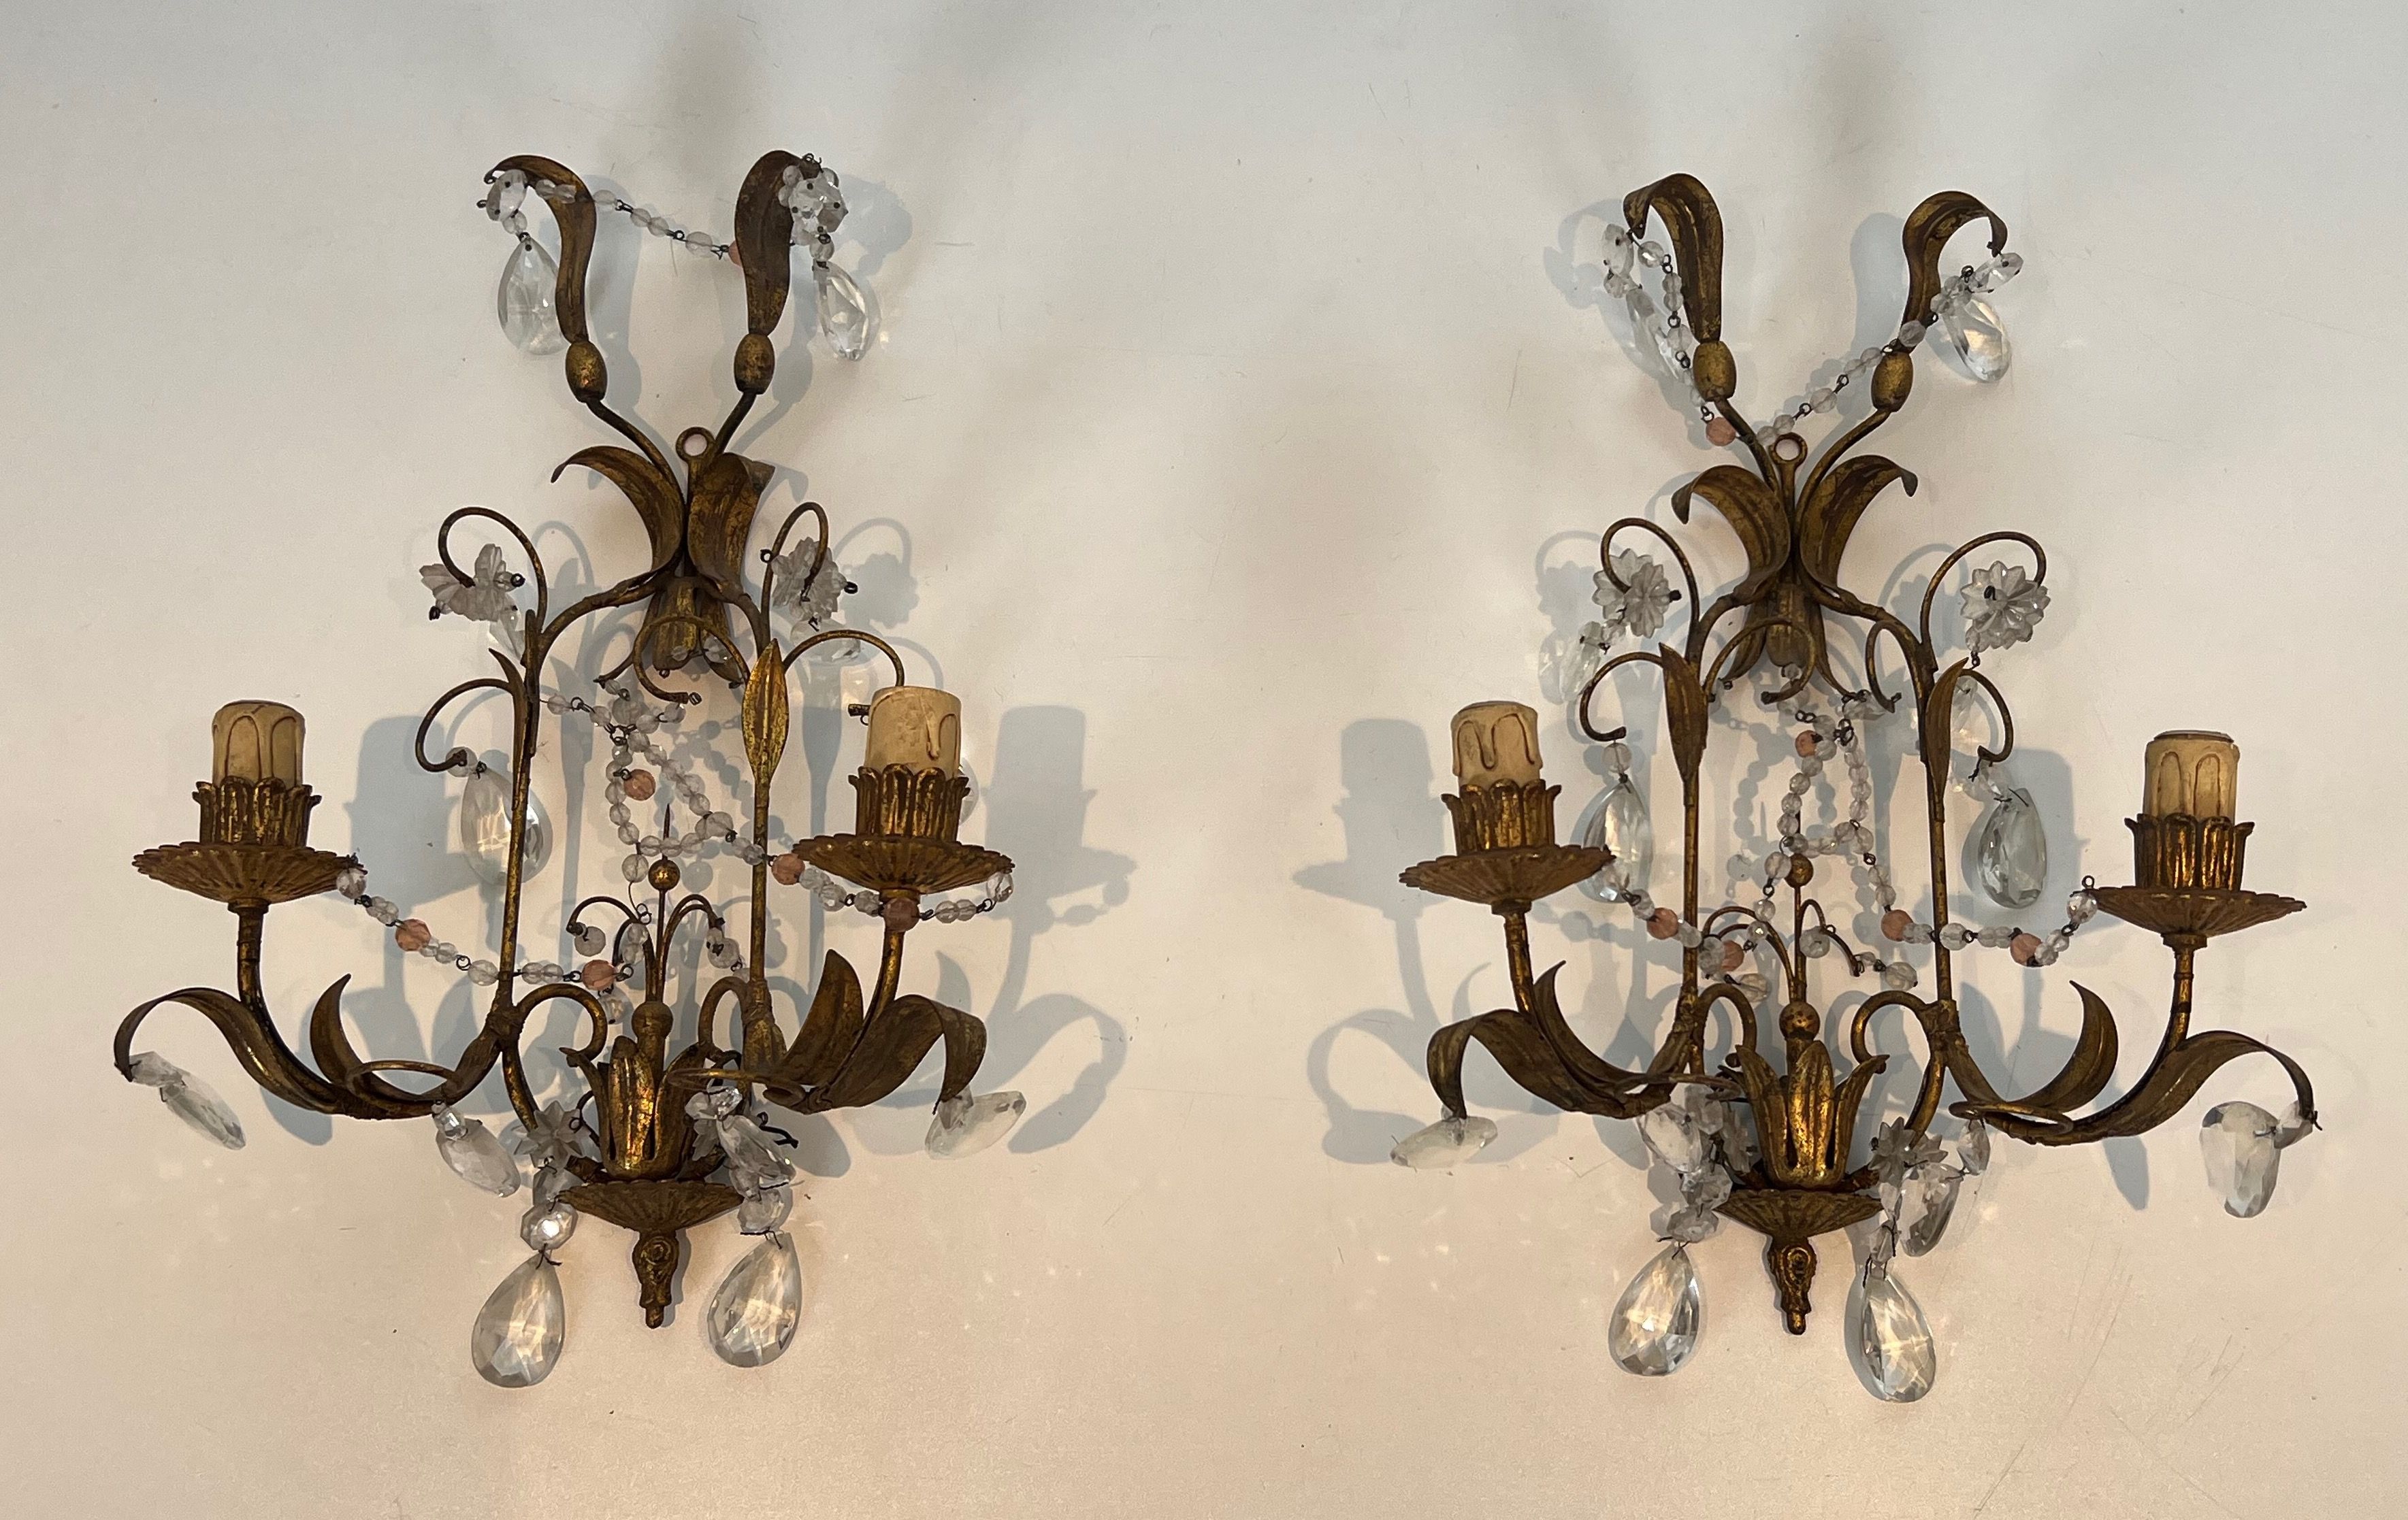 Pair of Gilded Metal and Crystals Wall Sconces in the style of Maison Baguès